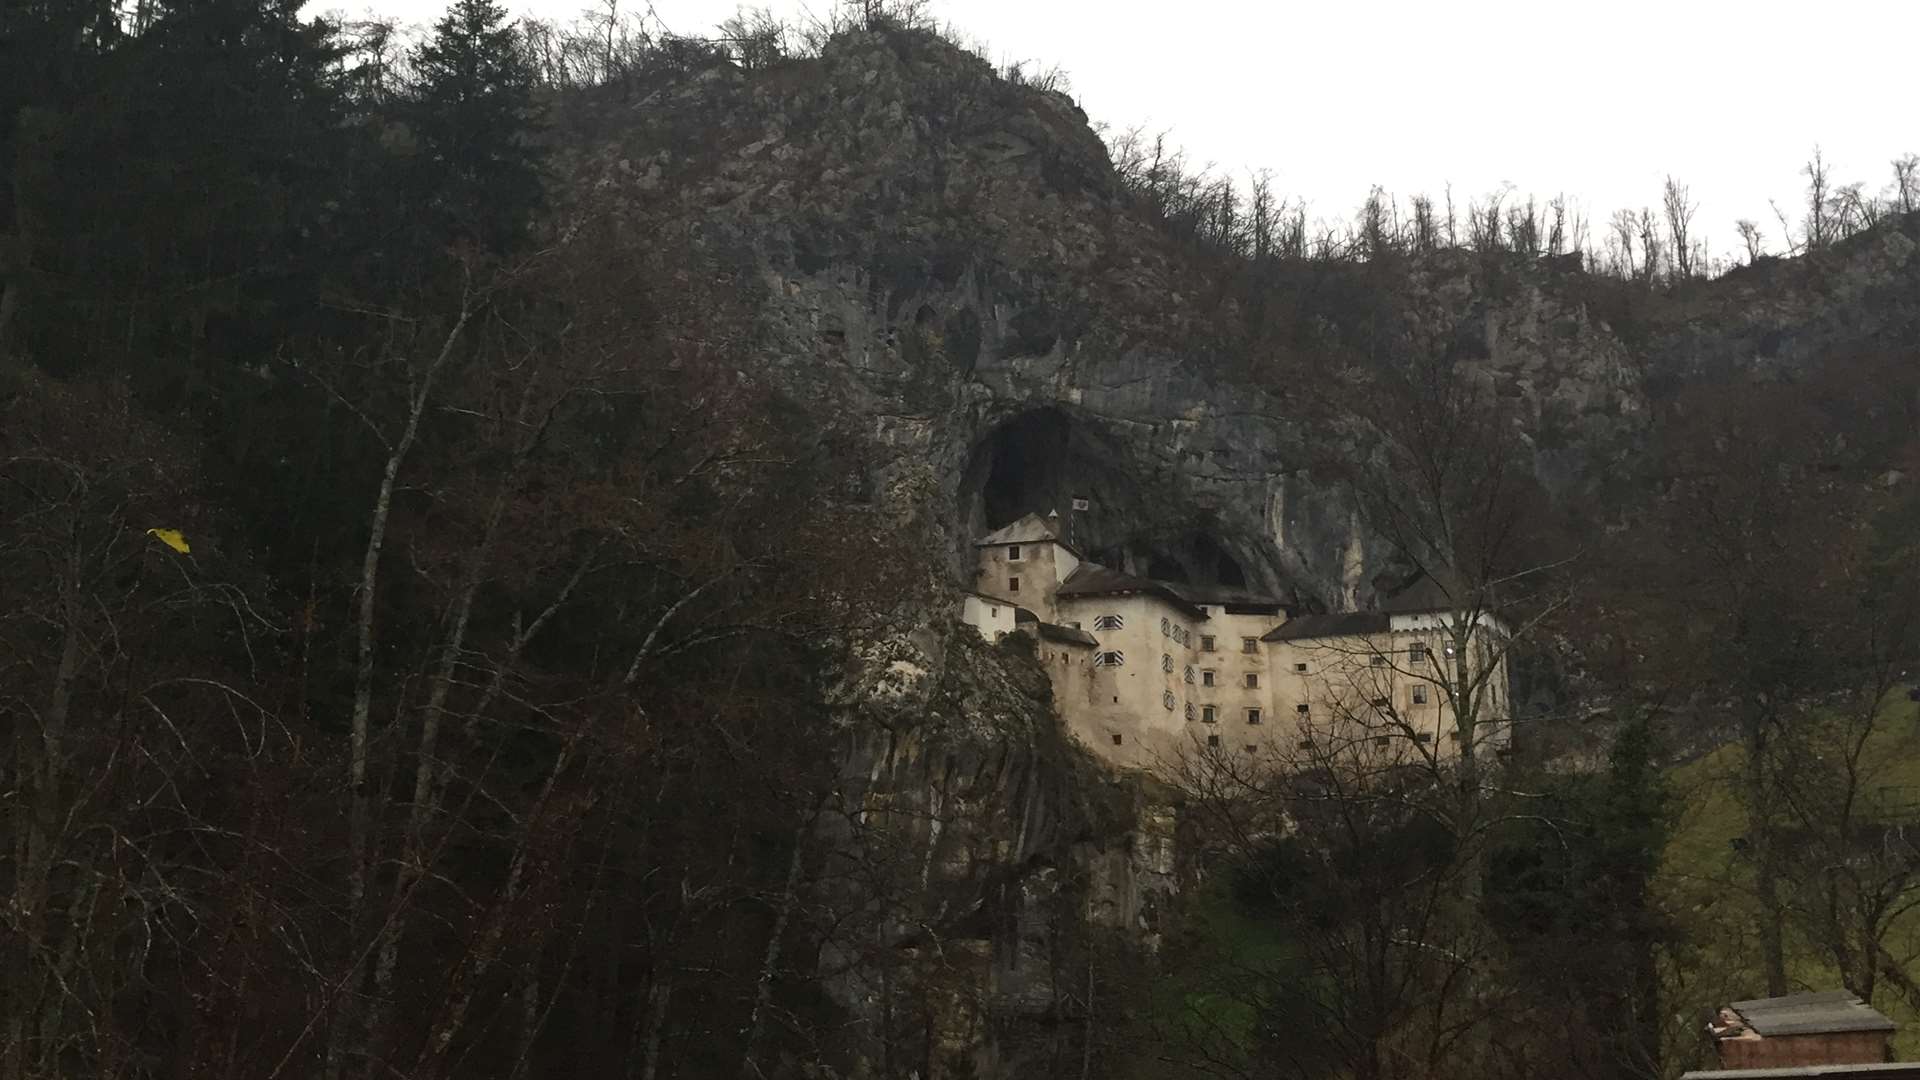 The Predjama Castle, which sits in the middle of a 123 metre high cliff